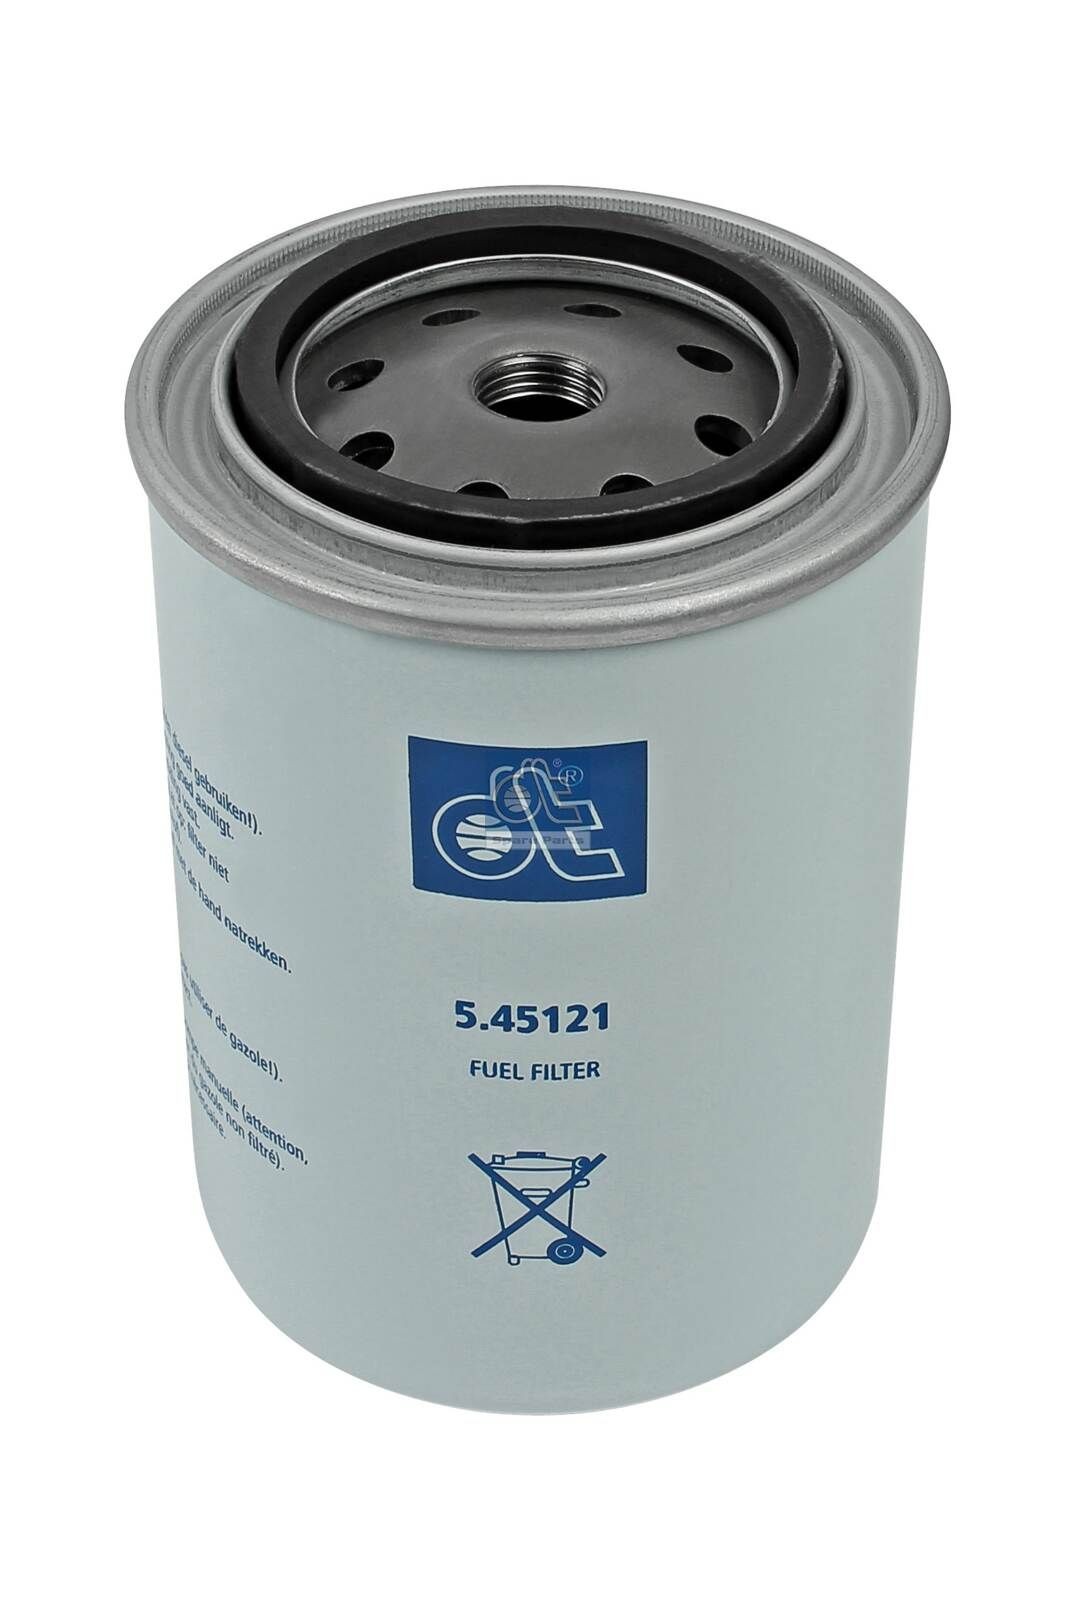 WDK 940/5 DT Spare Parts 5.45121 Fuel filter 01174422